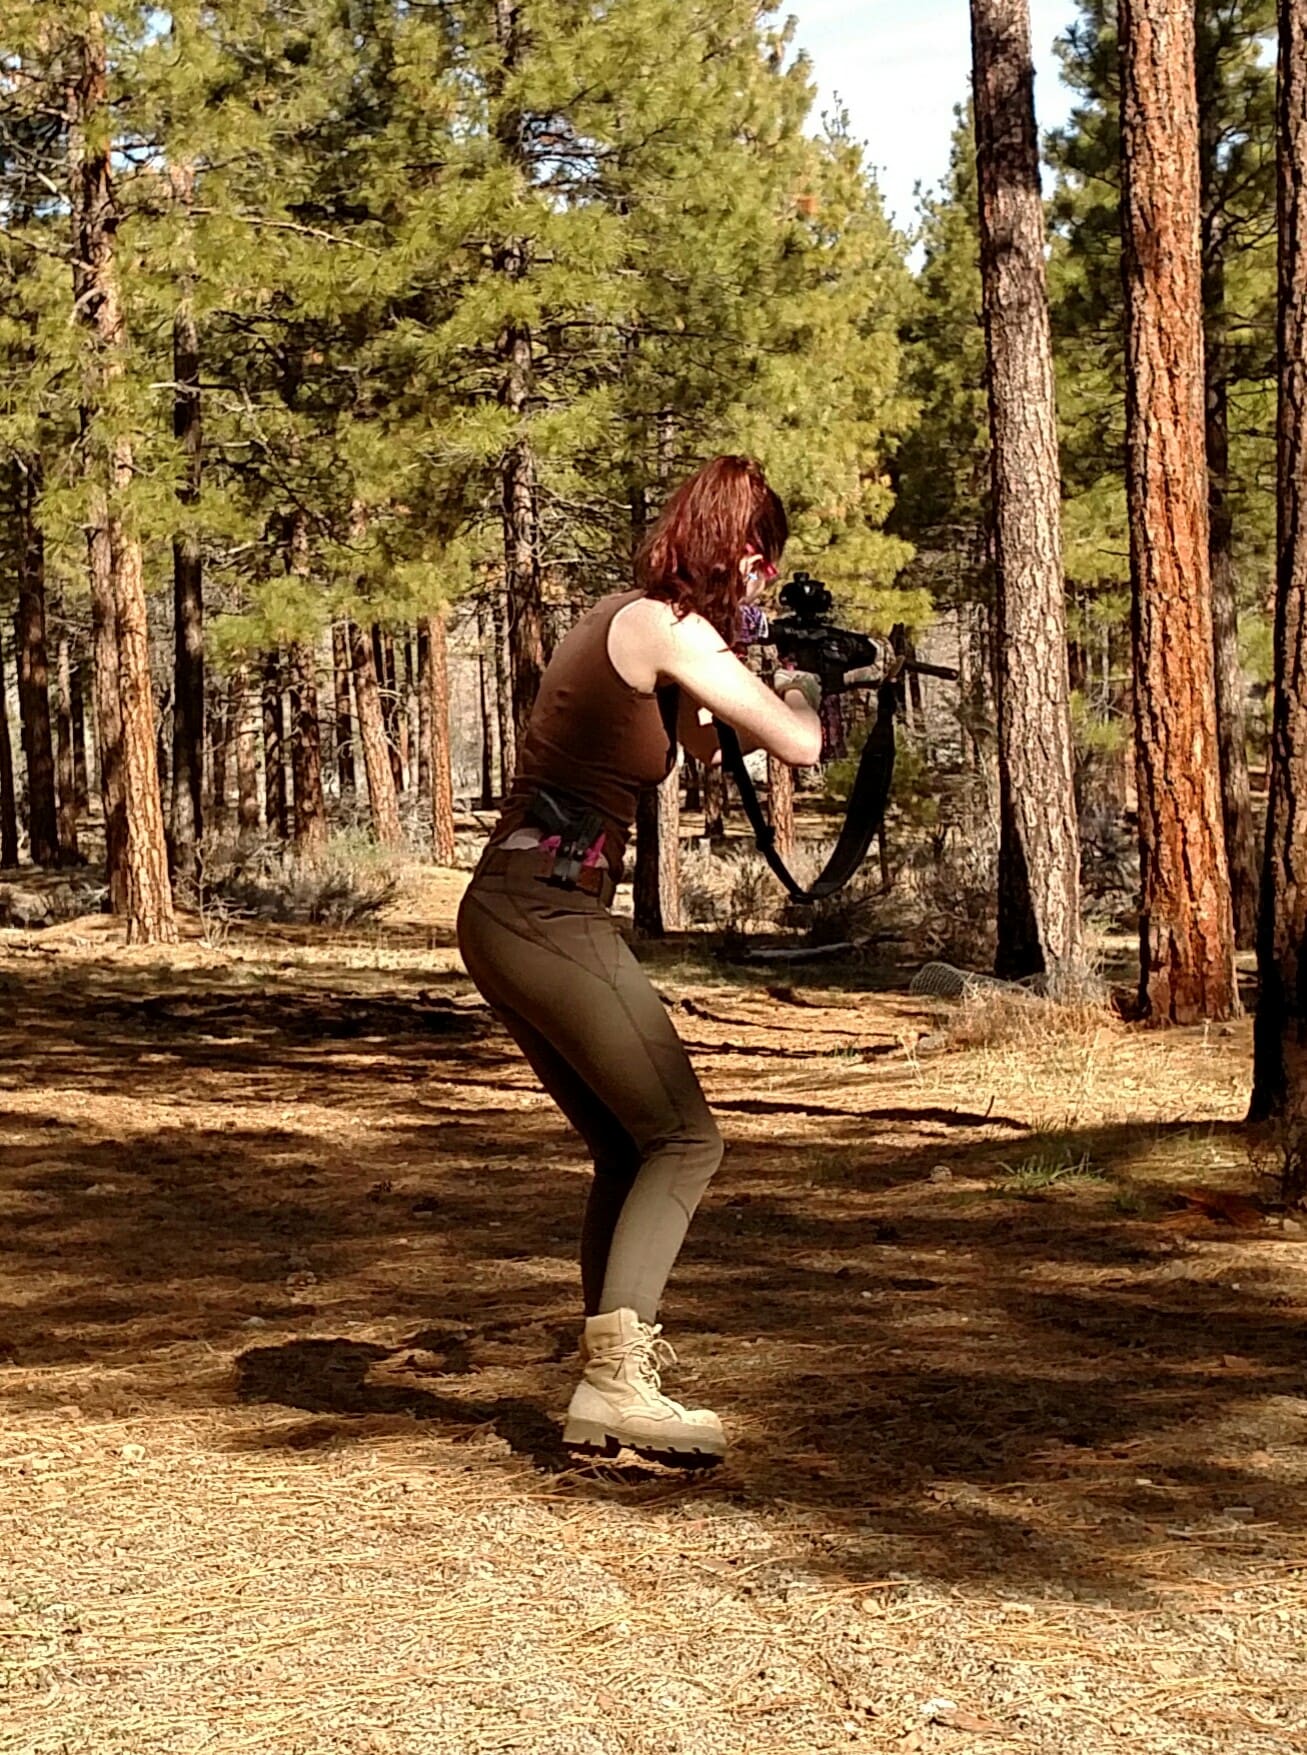 Gear Review: 5.11 Raven Range Tights (Tactical Yoga Pants) - The